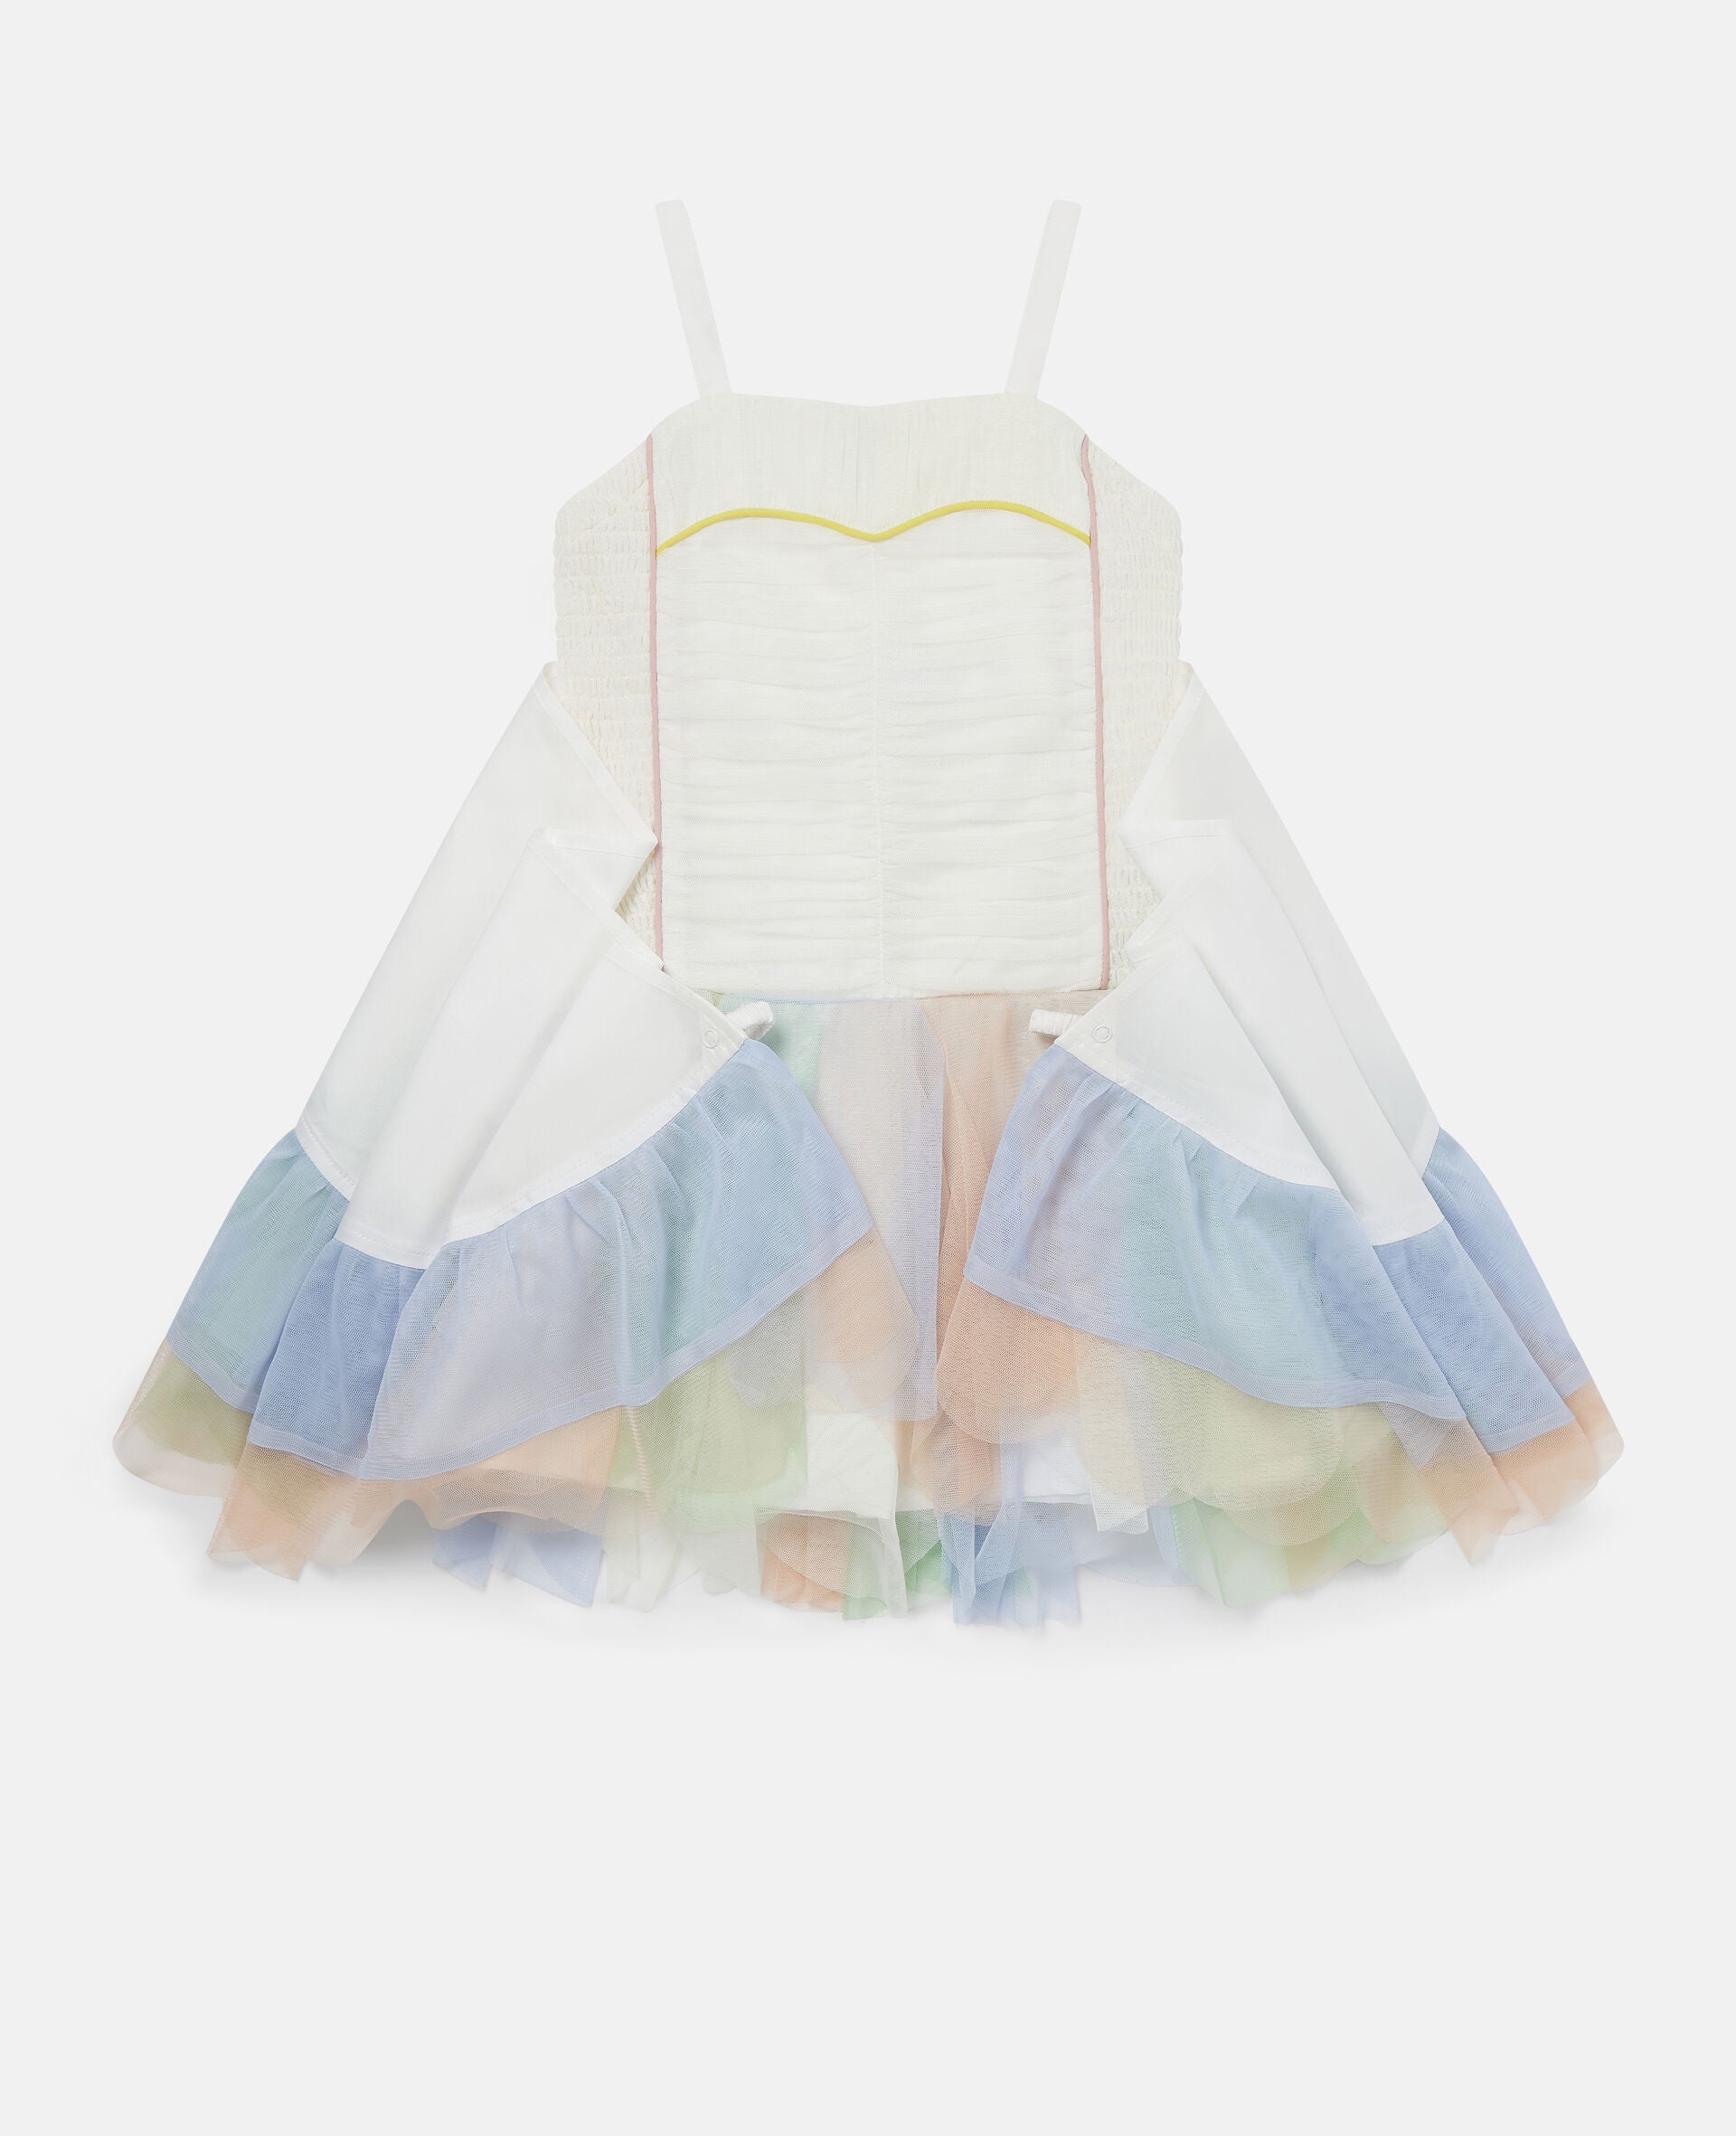 Stella Mccartney Tull Dress with multicolor skirt layers and wings